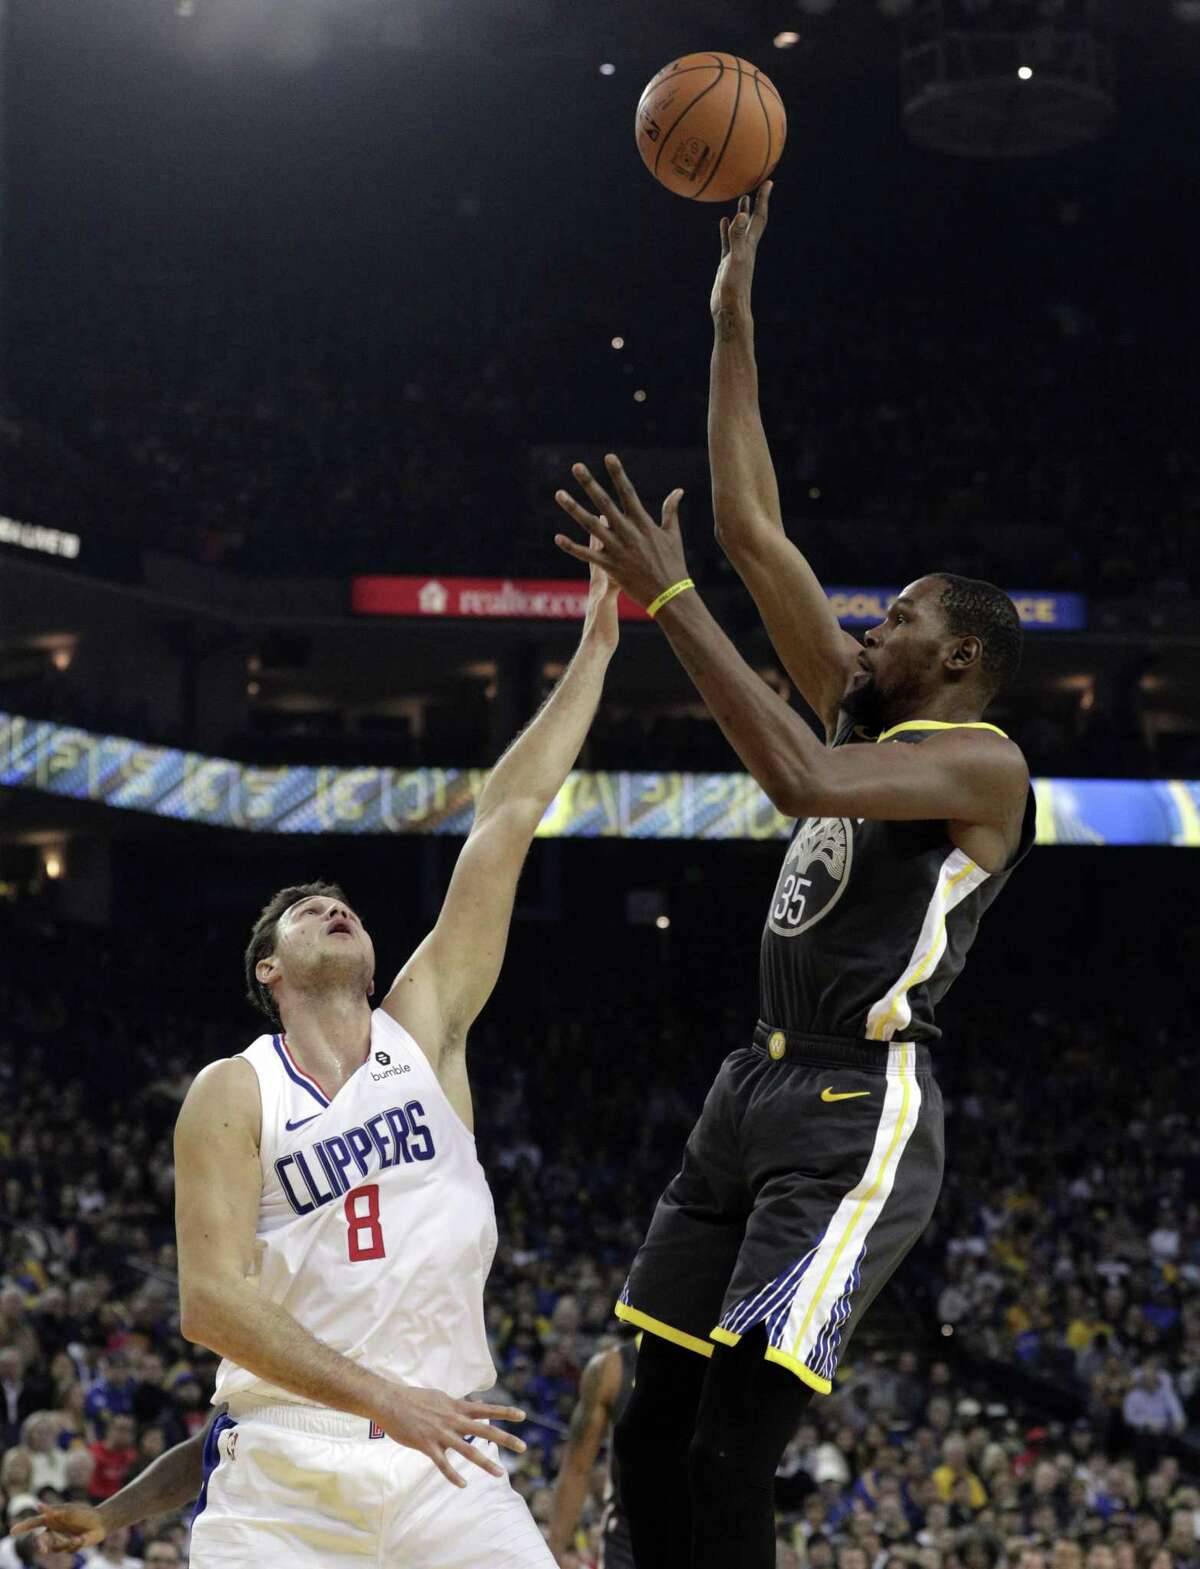 Kevin Durant (35) shoots over Danilo Gallinari (8) in the first half as the Golden State Warriors played the Los Angeles Clippers at Oracle Arena in Oakland, Calif., on Sunday, December 23, 2018.